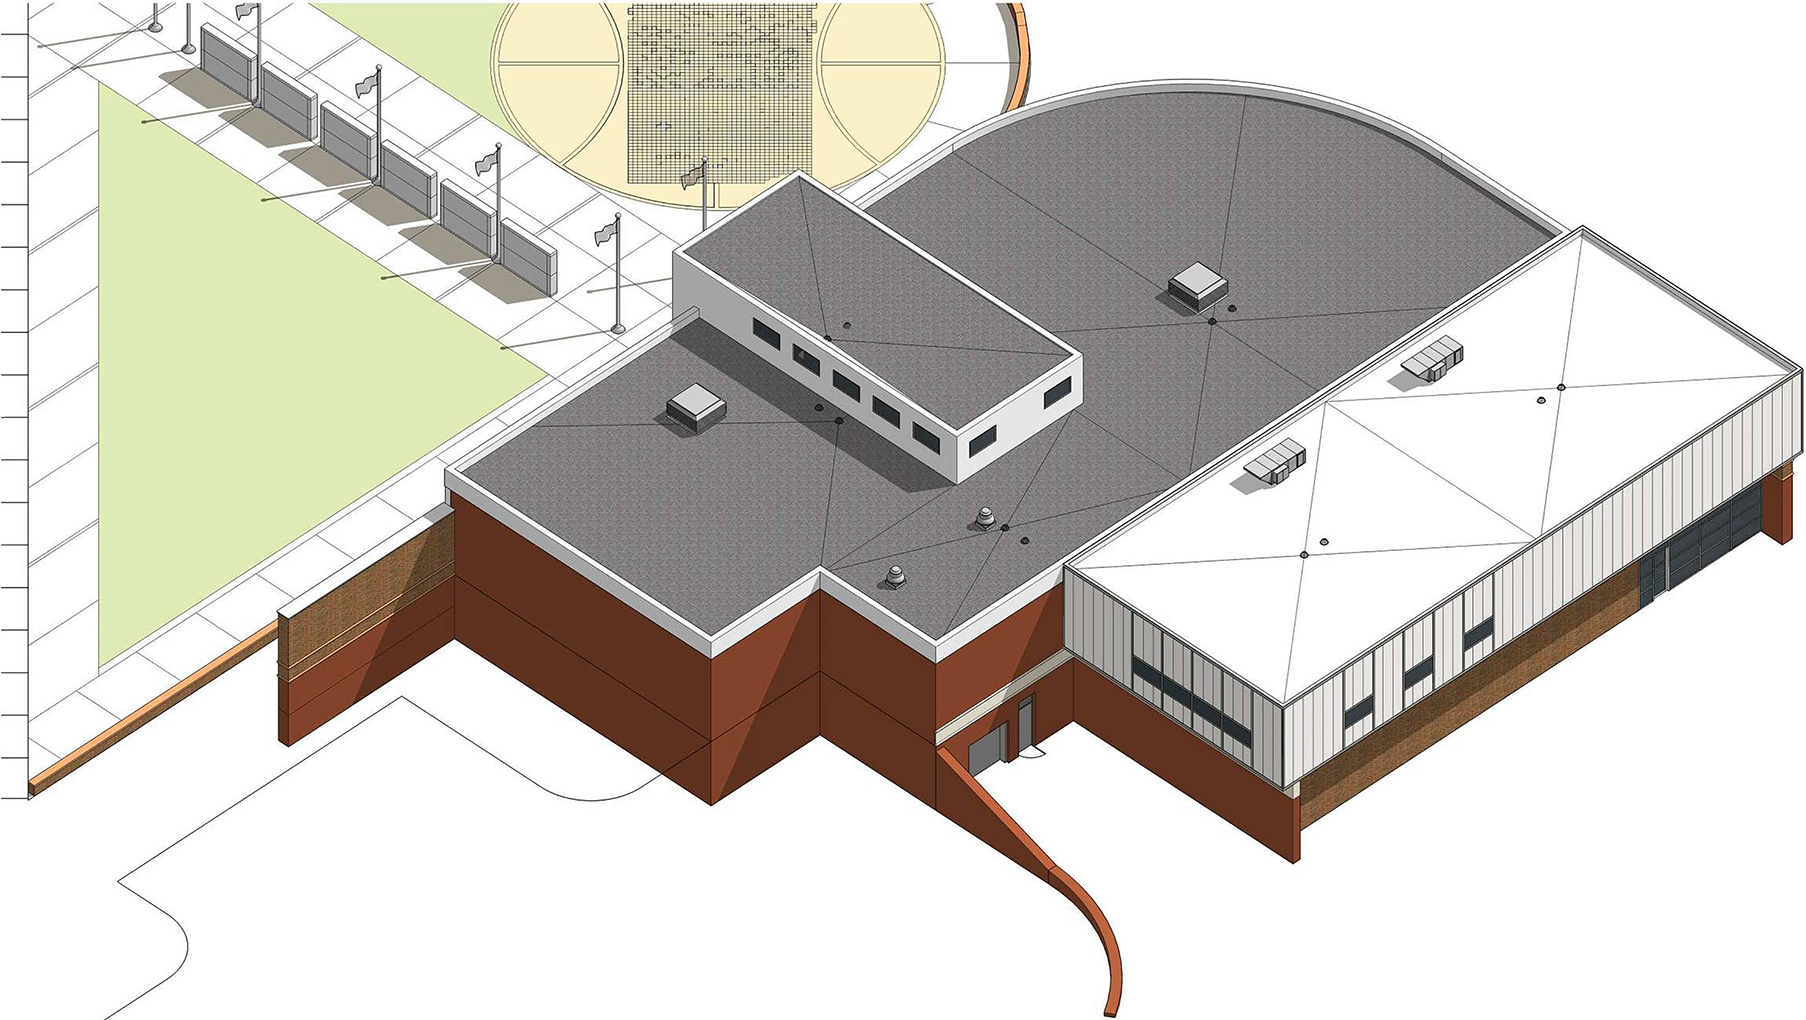 Rear Bird's Eye View of Proposed Addition